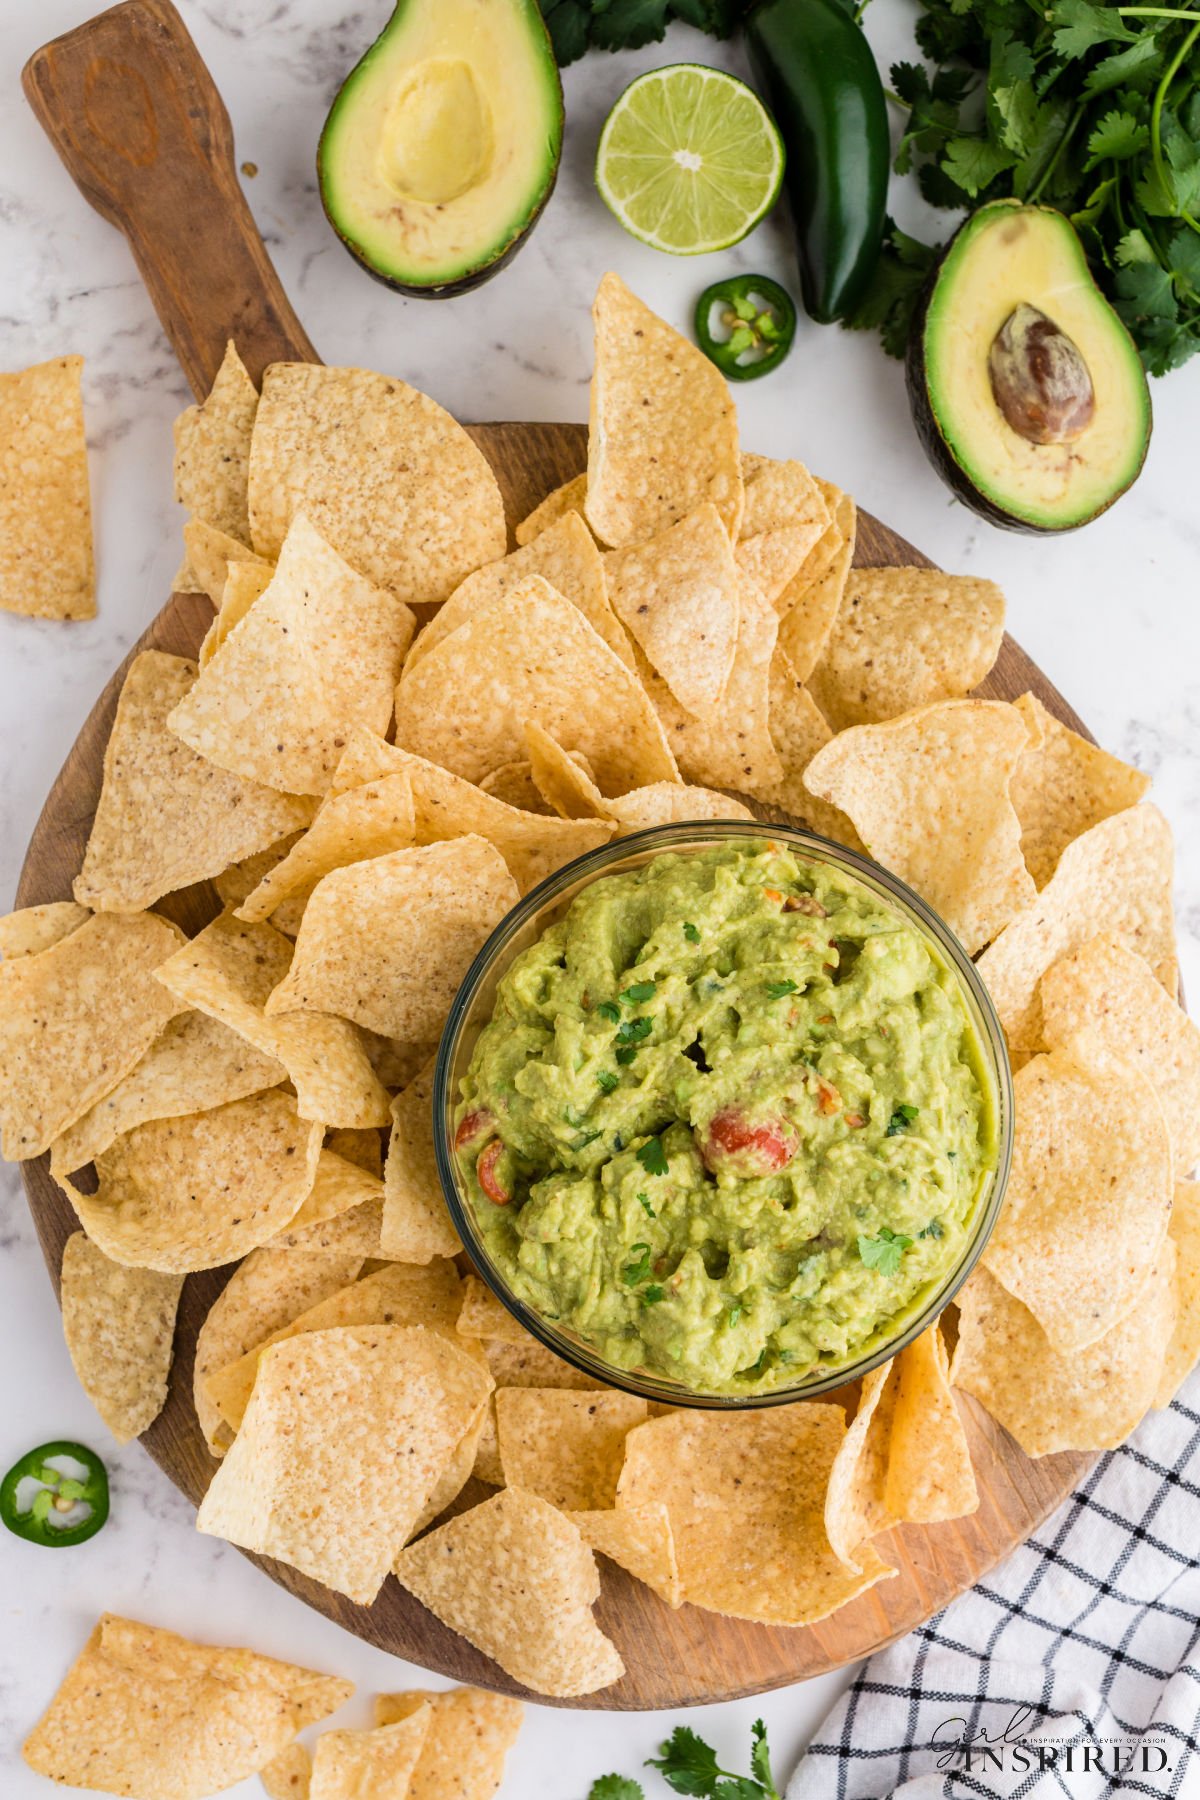 Bowl of guacamole with chips surrounding it.